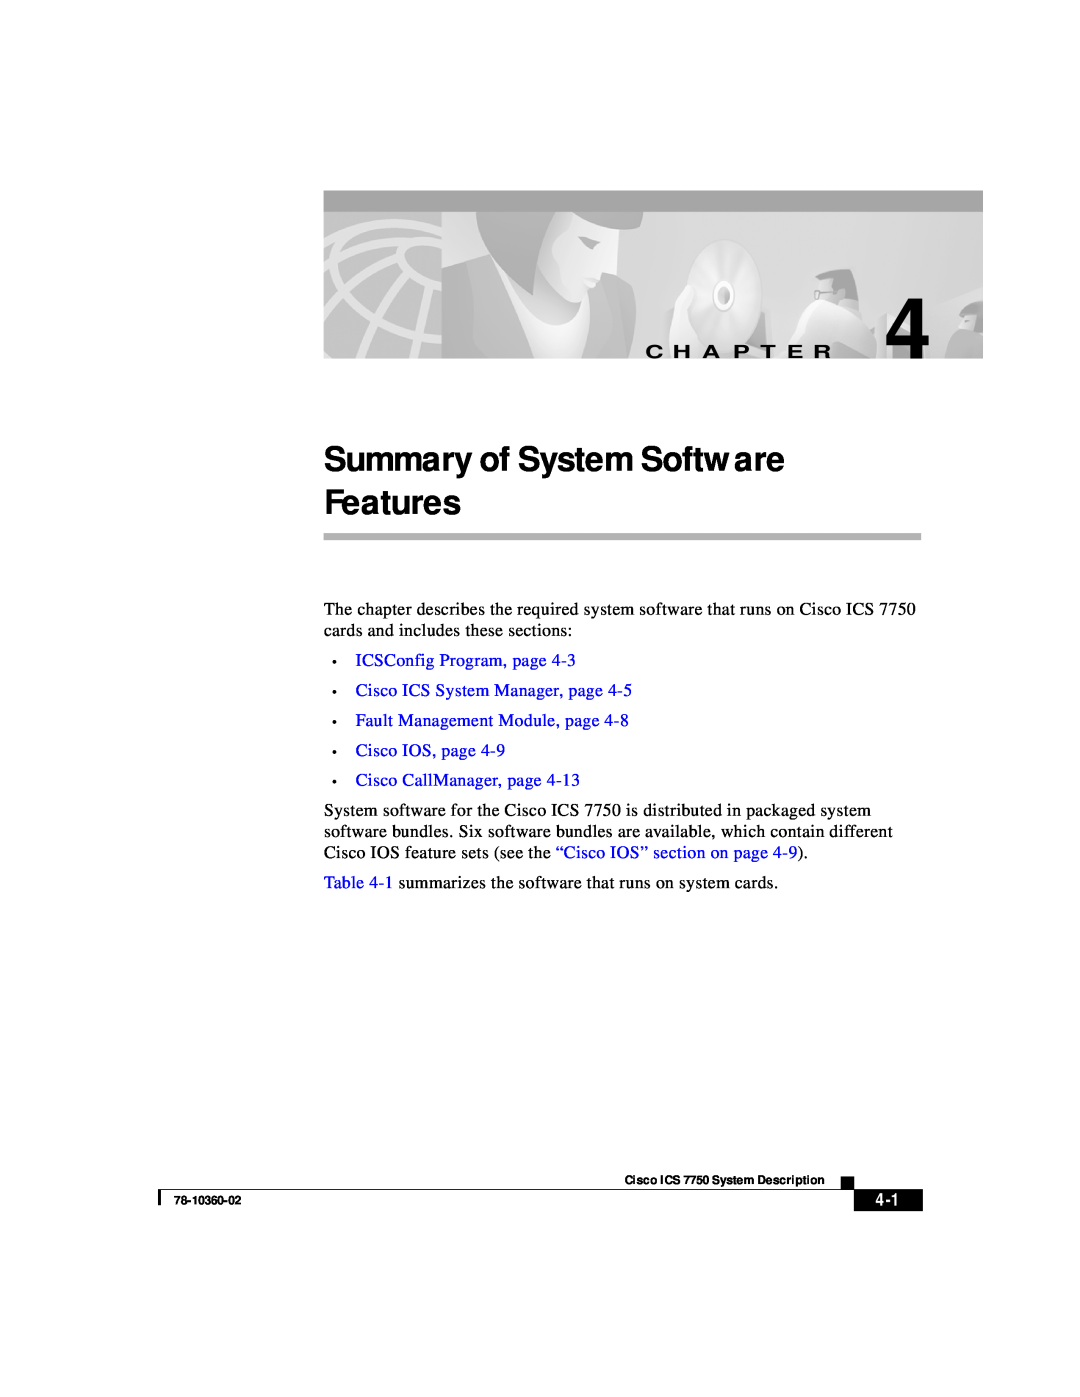 Cisco Systems ICS-7750 manual Summary of System Software Features, C H A P T E R 